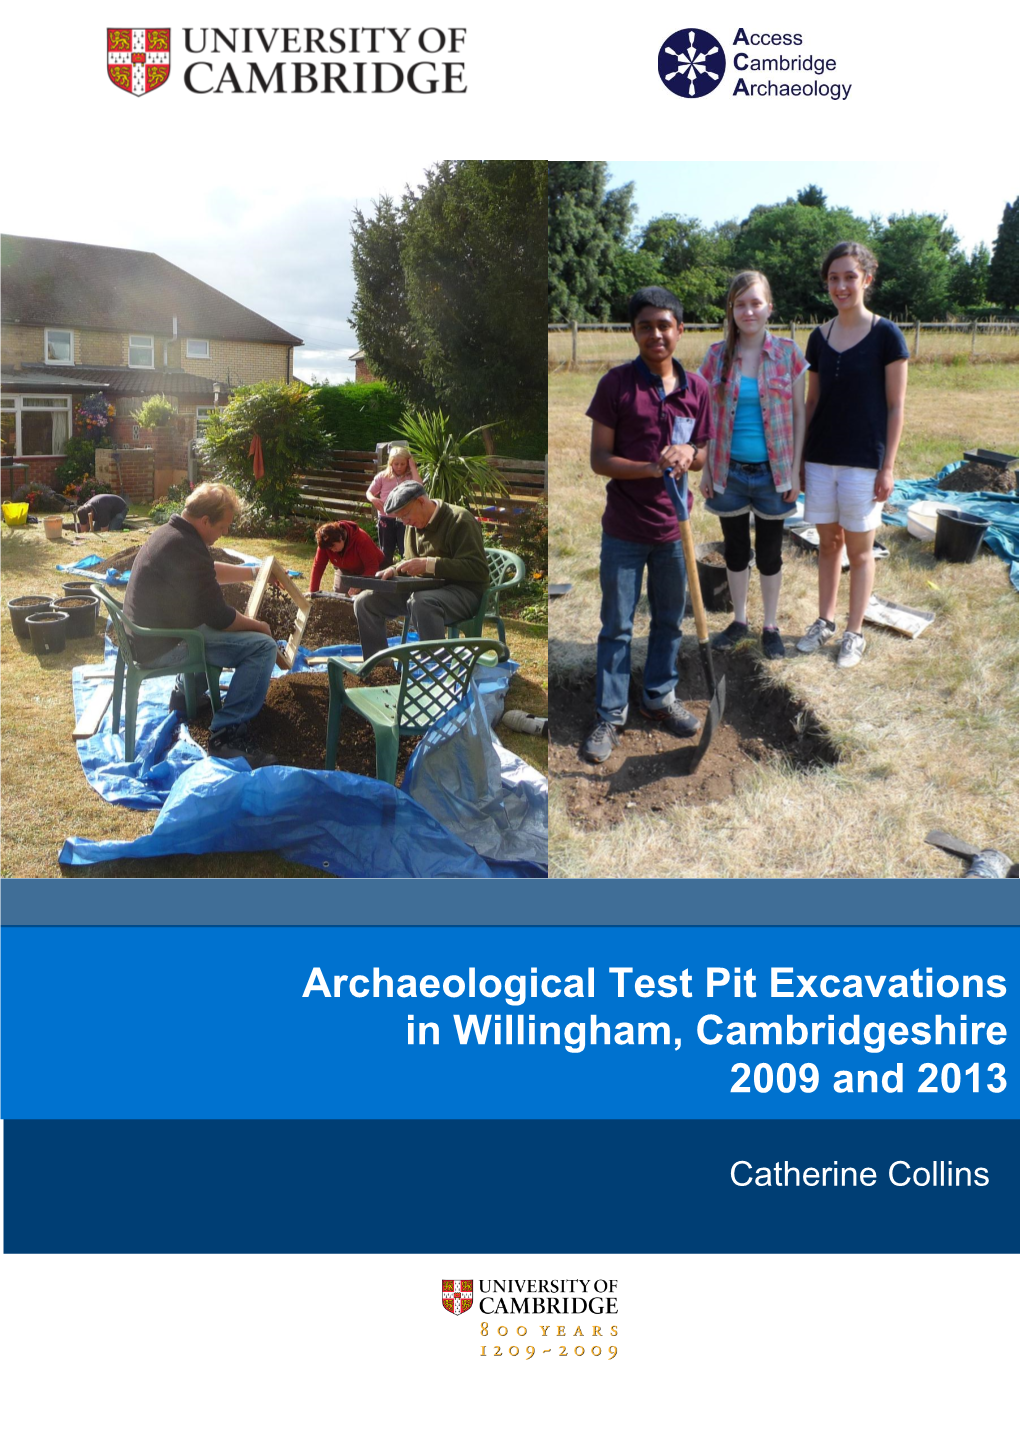 Archaeological Test Pit Excavations in Willingham, Cambridgeshire 2009 and 2013